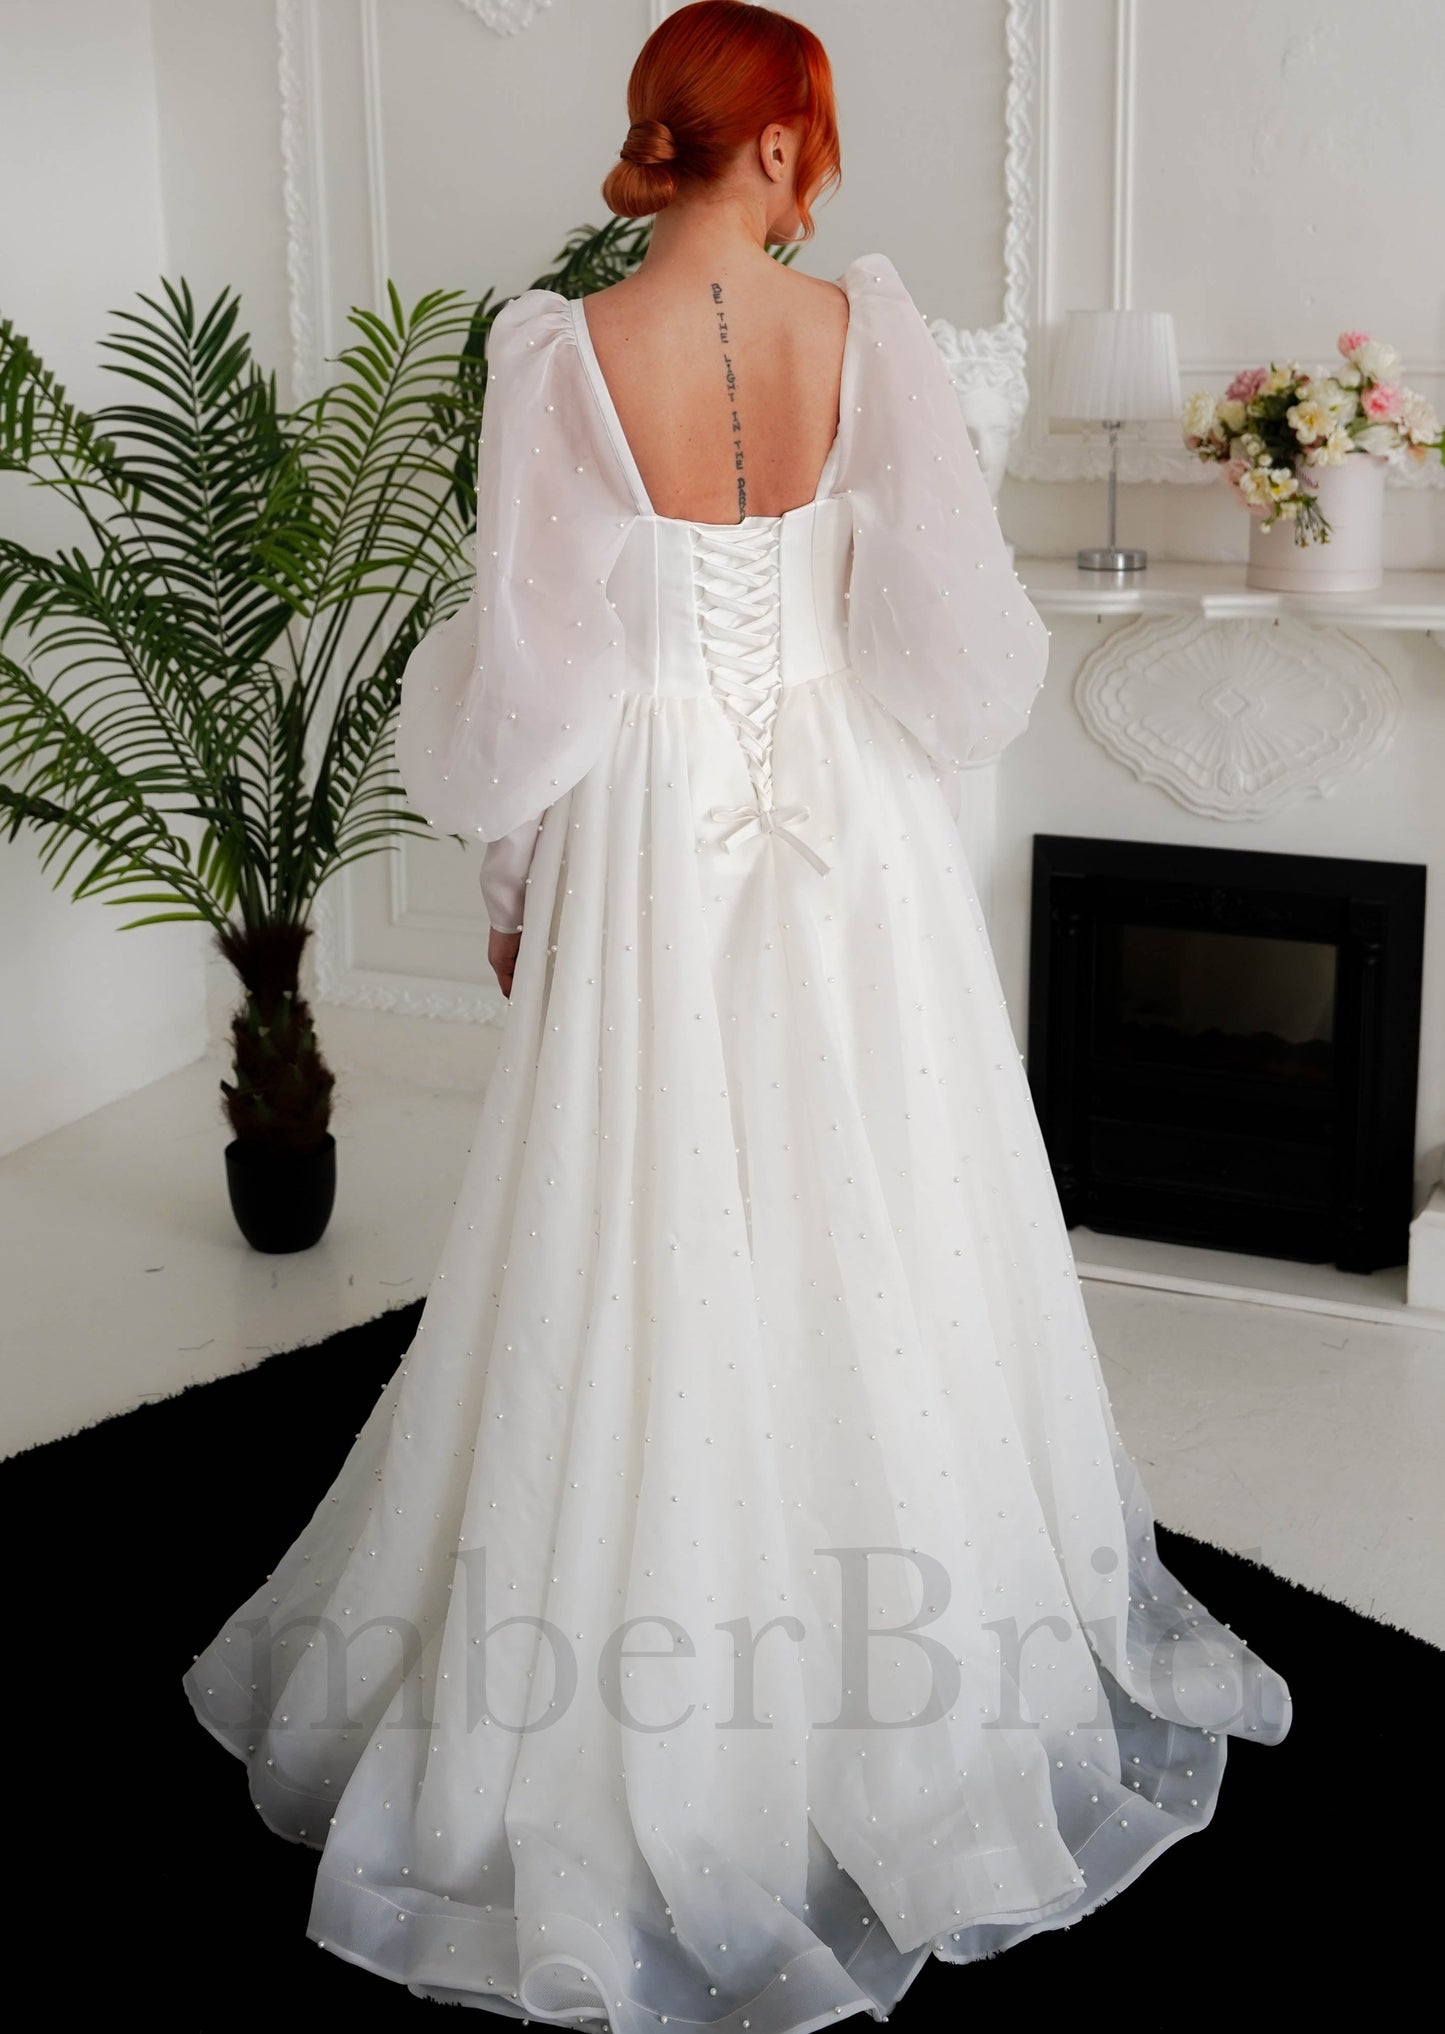 Romantic A Line Organza Wedding Dress with Bishop Sleeves and Pearled Design